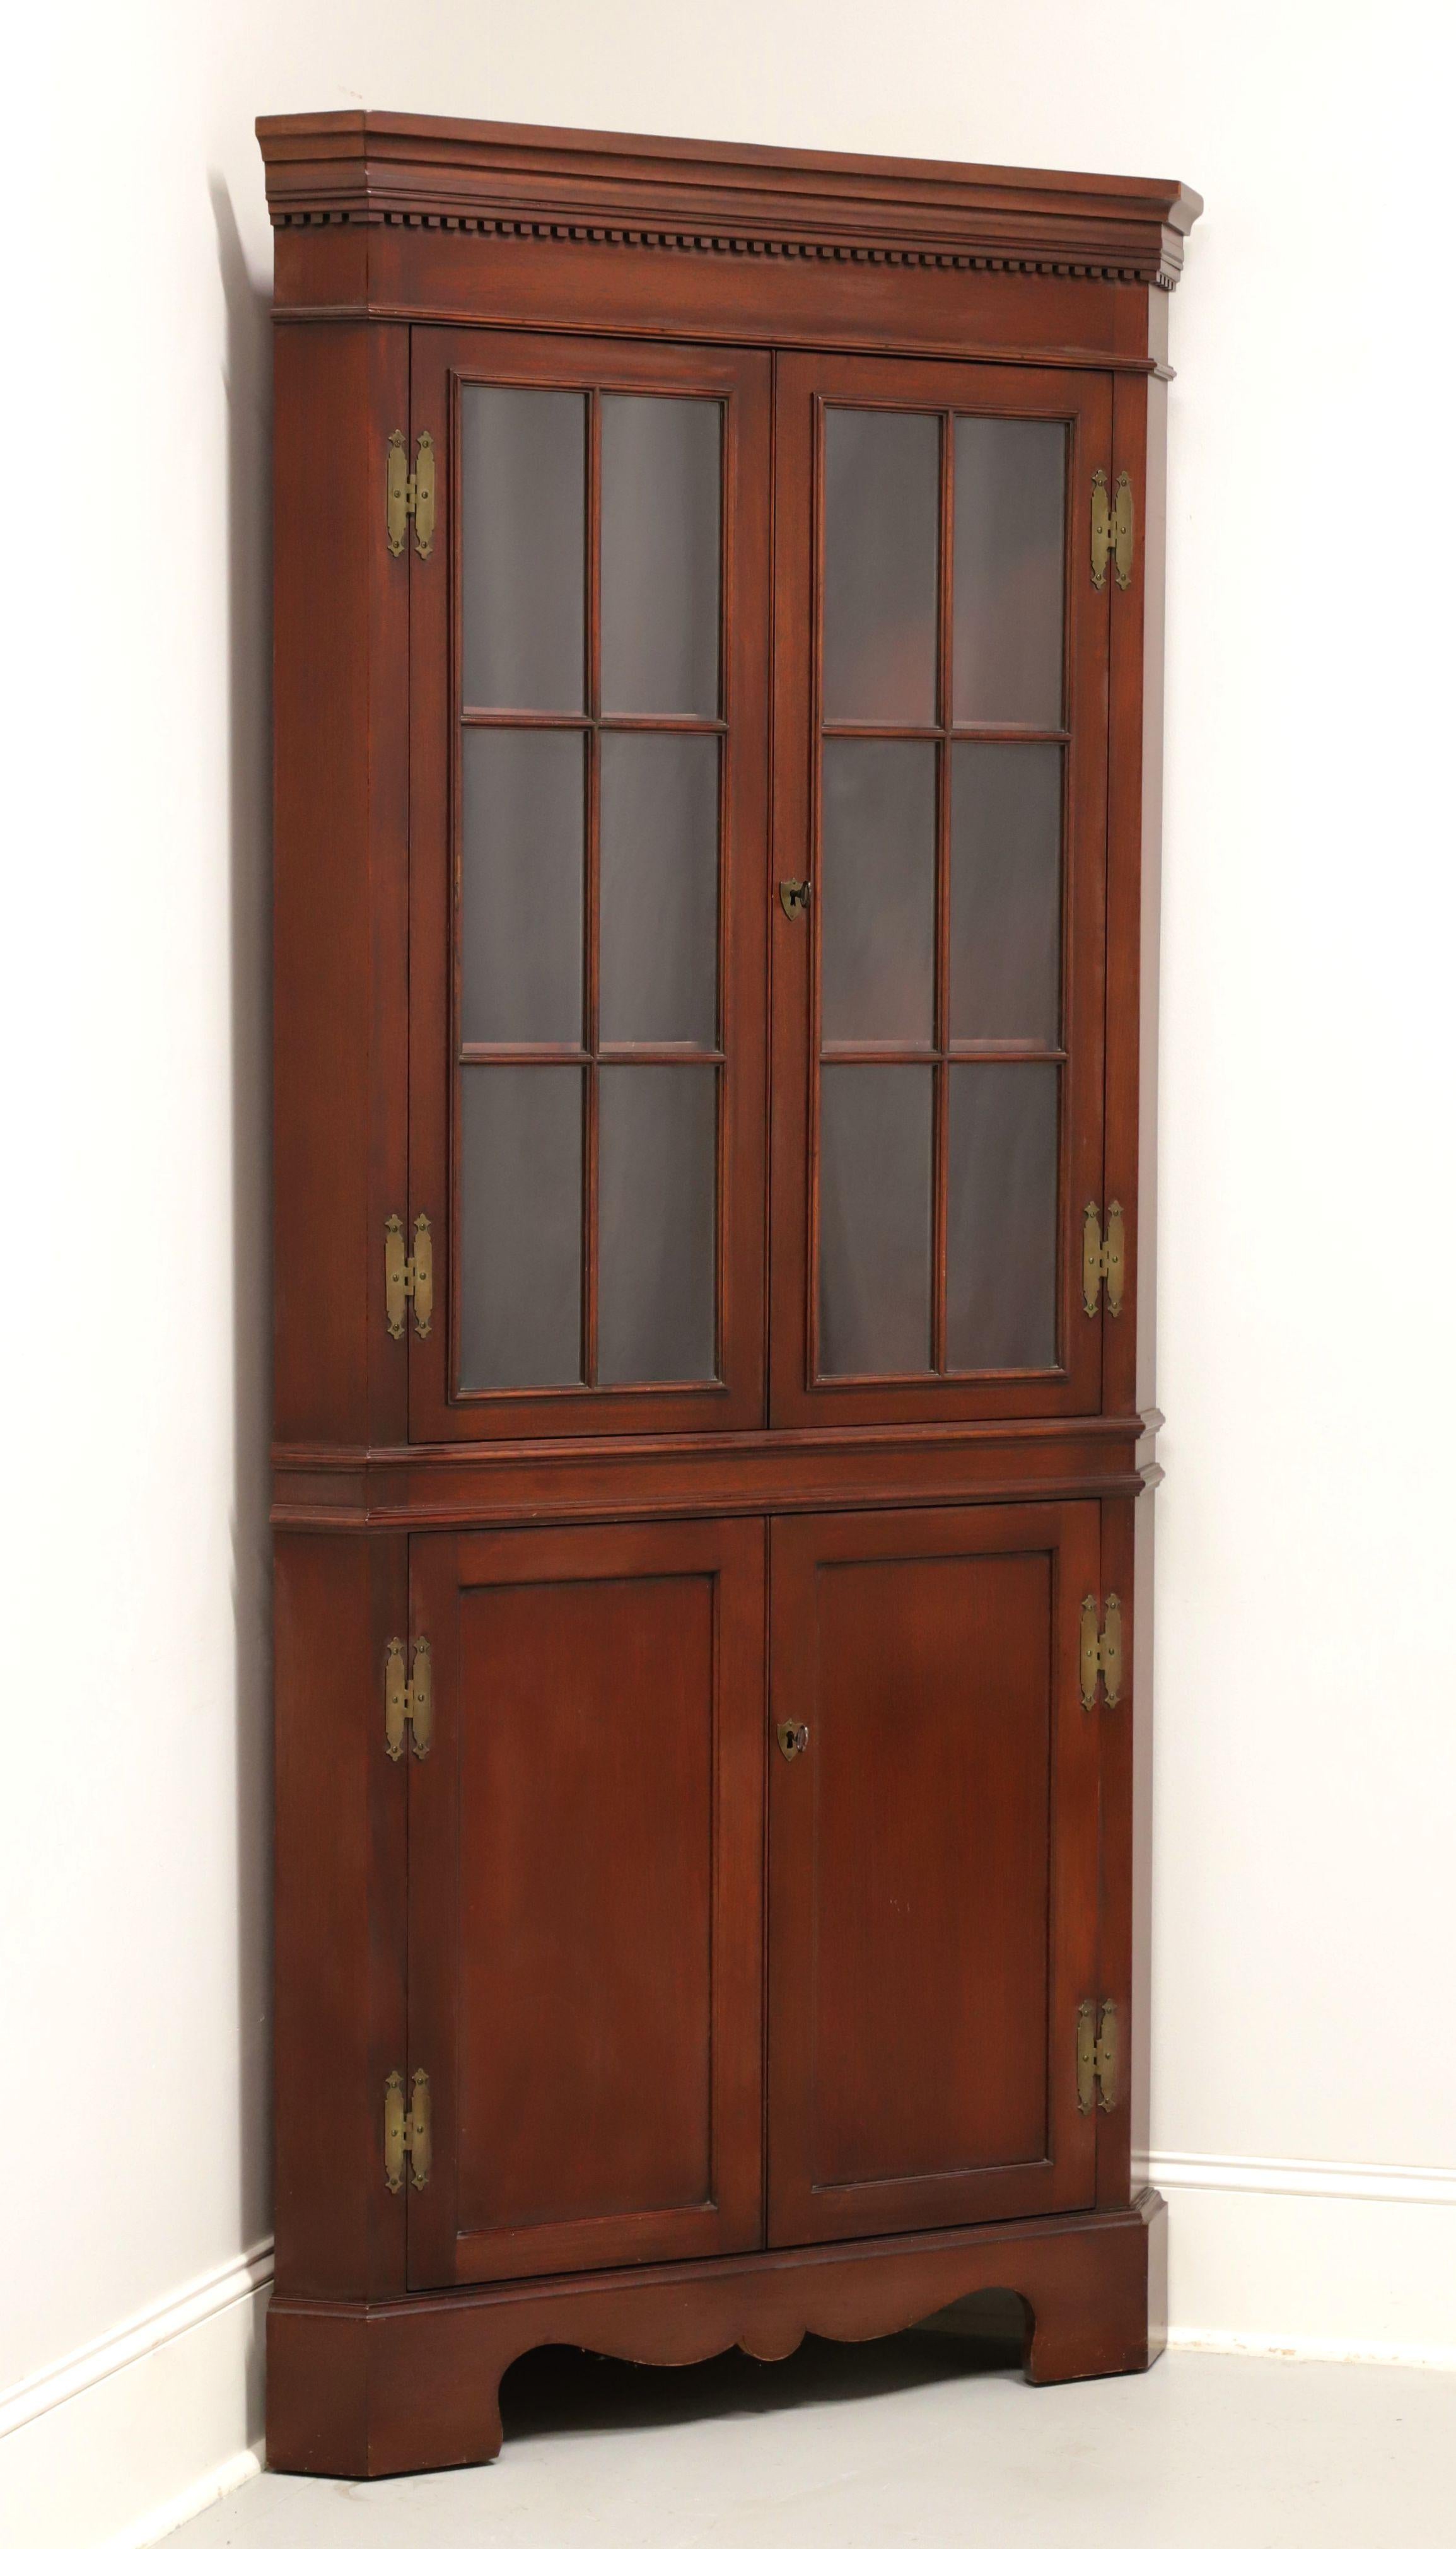 CRAFTIQUE Solid Mahogany Chippendale Style Corner Cupboard / Cabinet - B For Sale 5